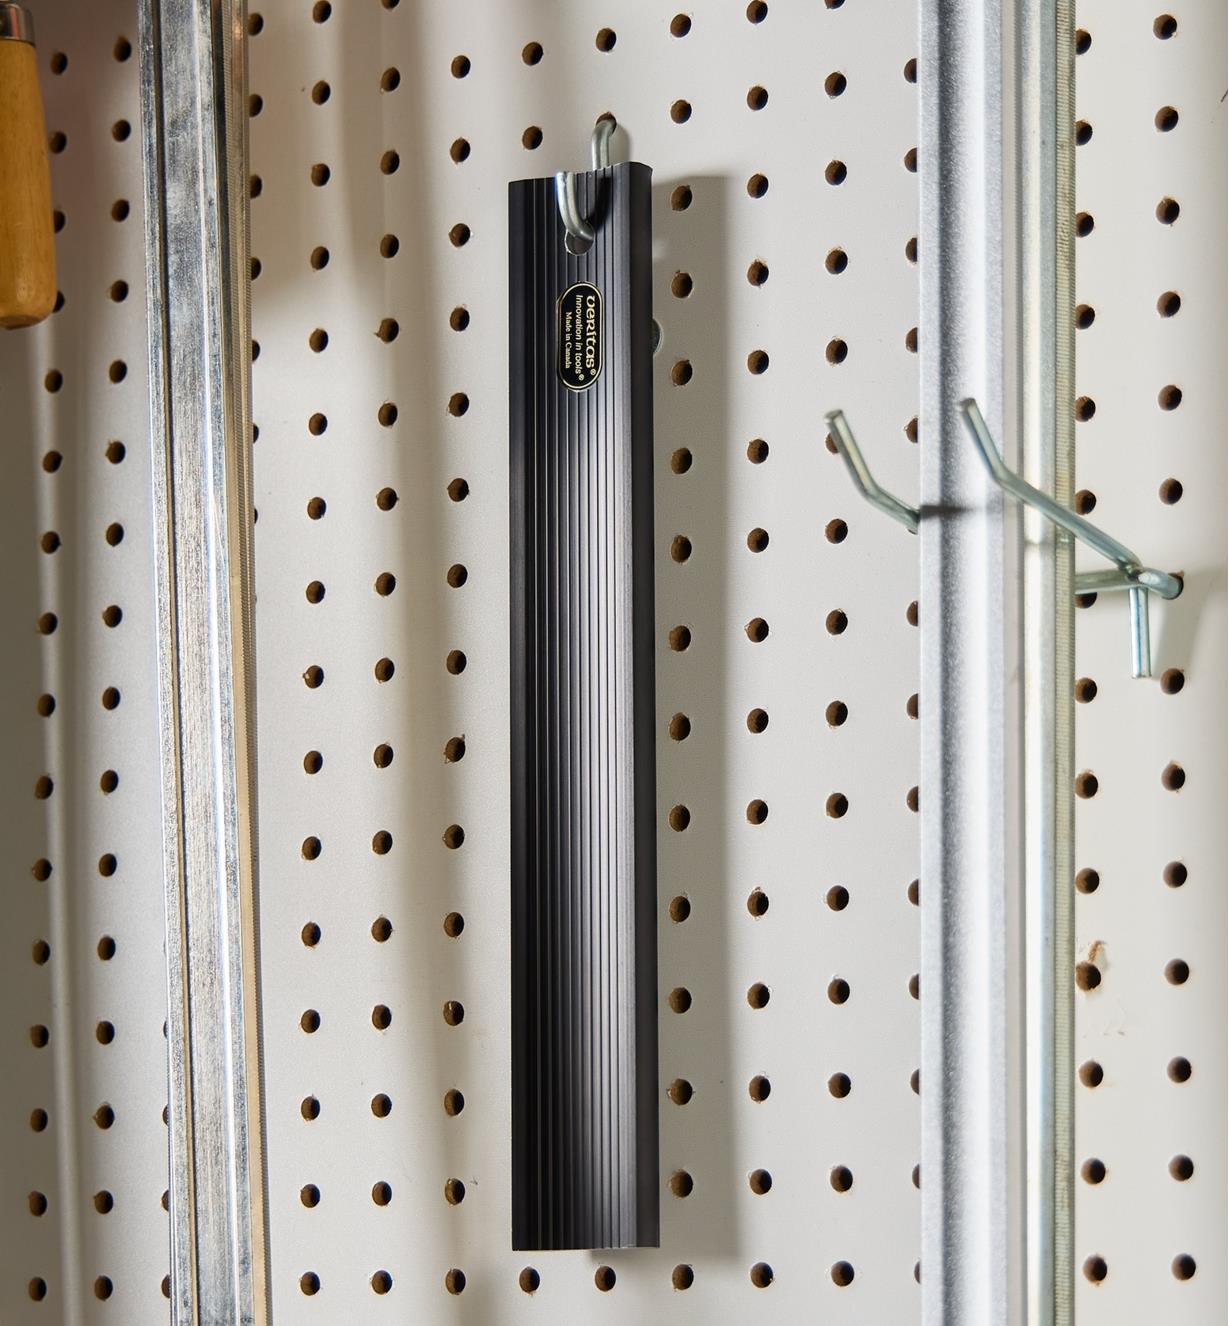 Straightedge hanging on a pegboard hook